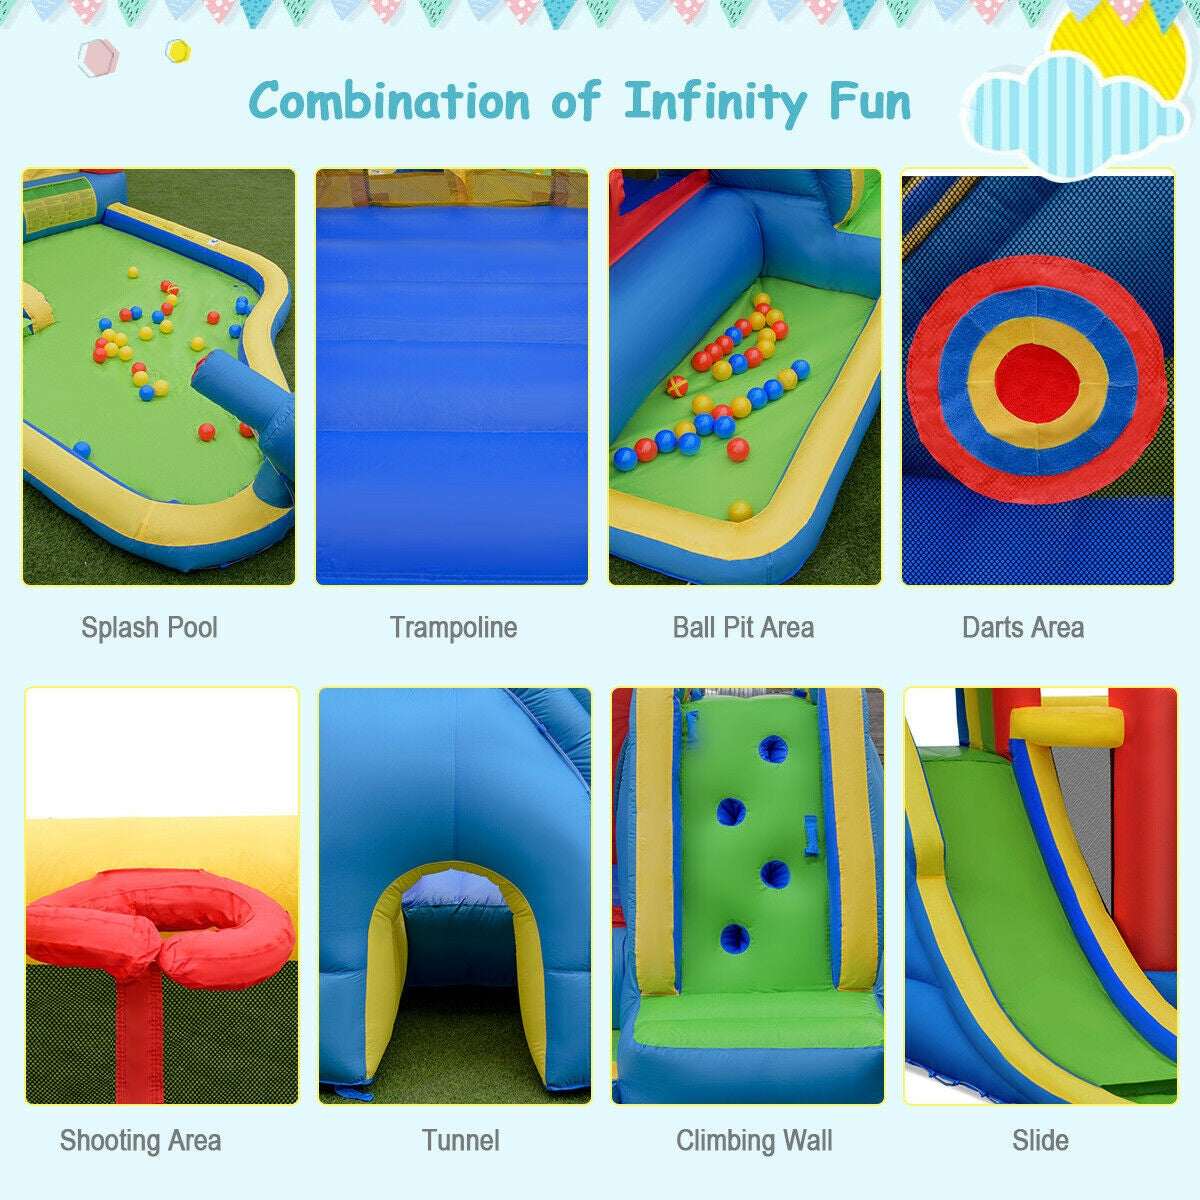 9-in-1 Design for Endless Fun: This inflatable bounce house offers a versatile 9-in-1 design, featuring a trampoline, long slide, climbing wall, water cannon, large splashing pool, tunnel, dart game, basketball hoop, and ball playing area. Your children can enjoy a variety of activities and have endless fun.